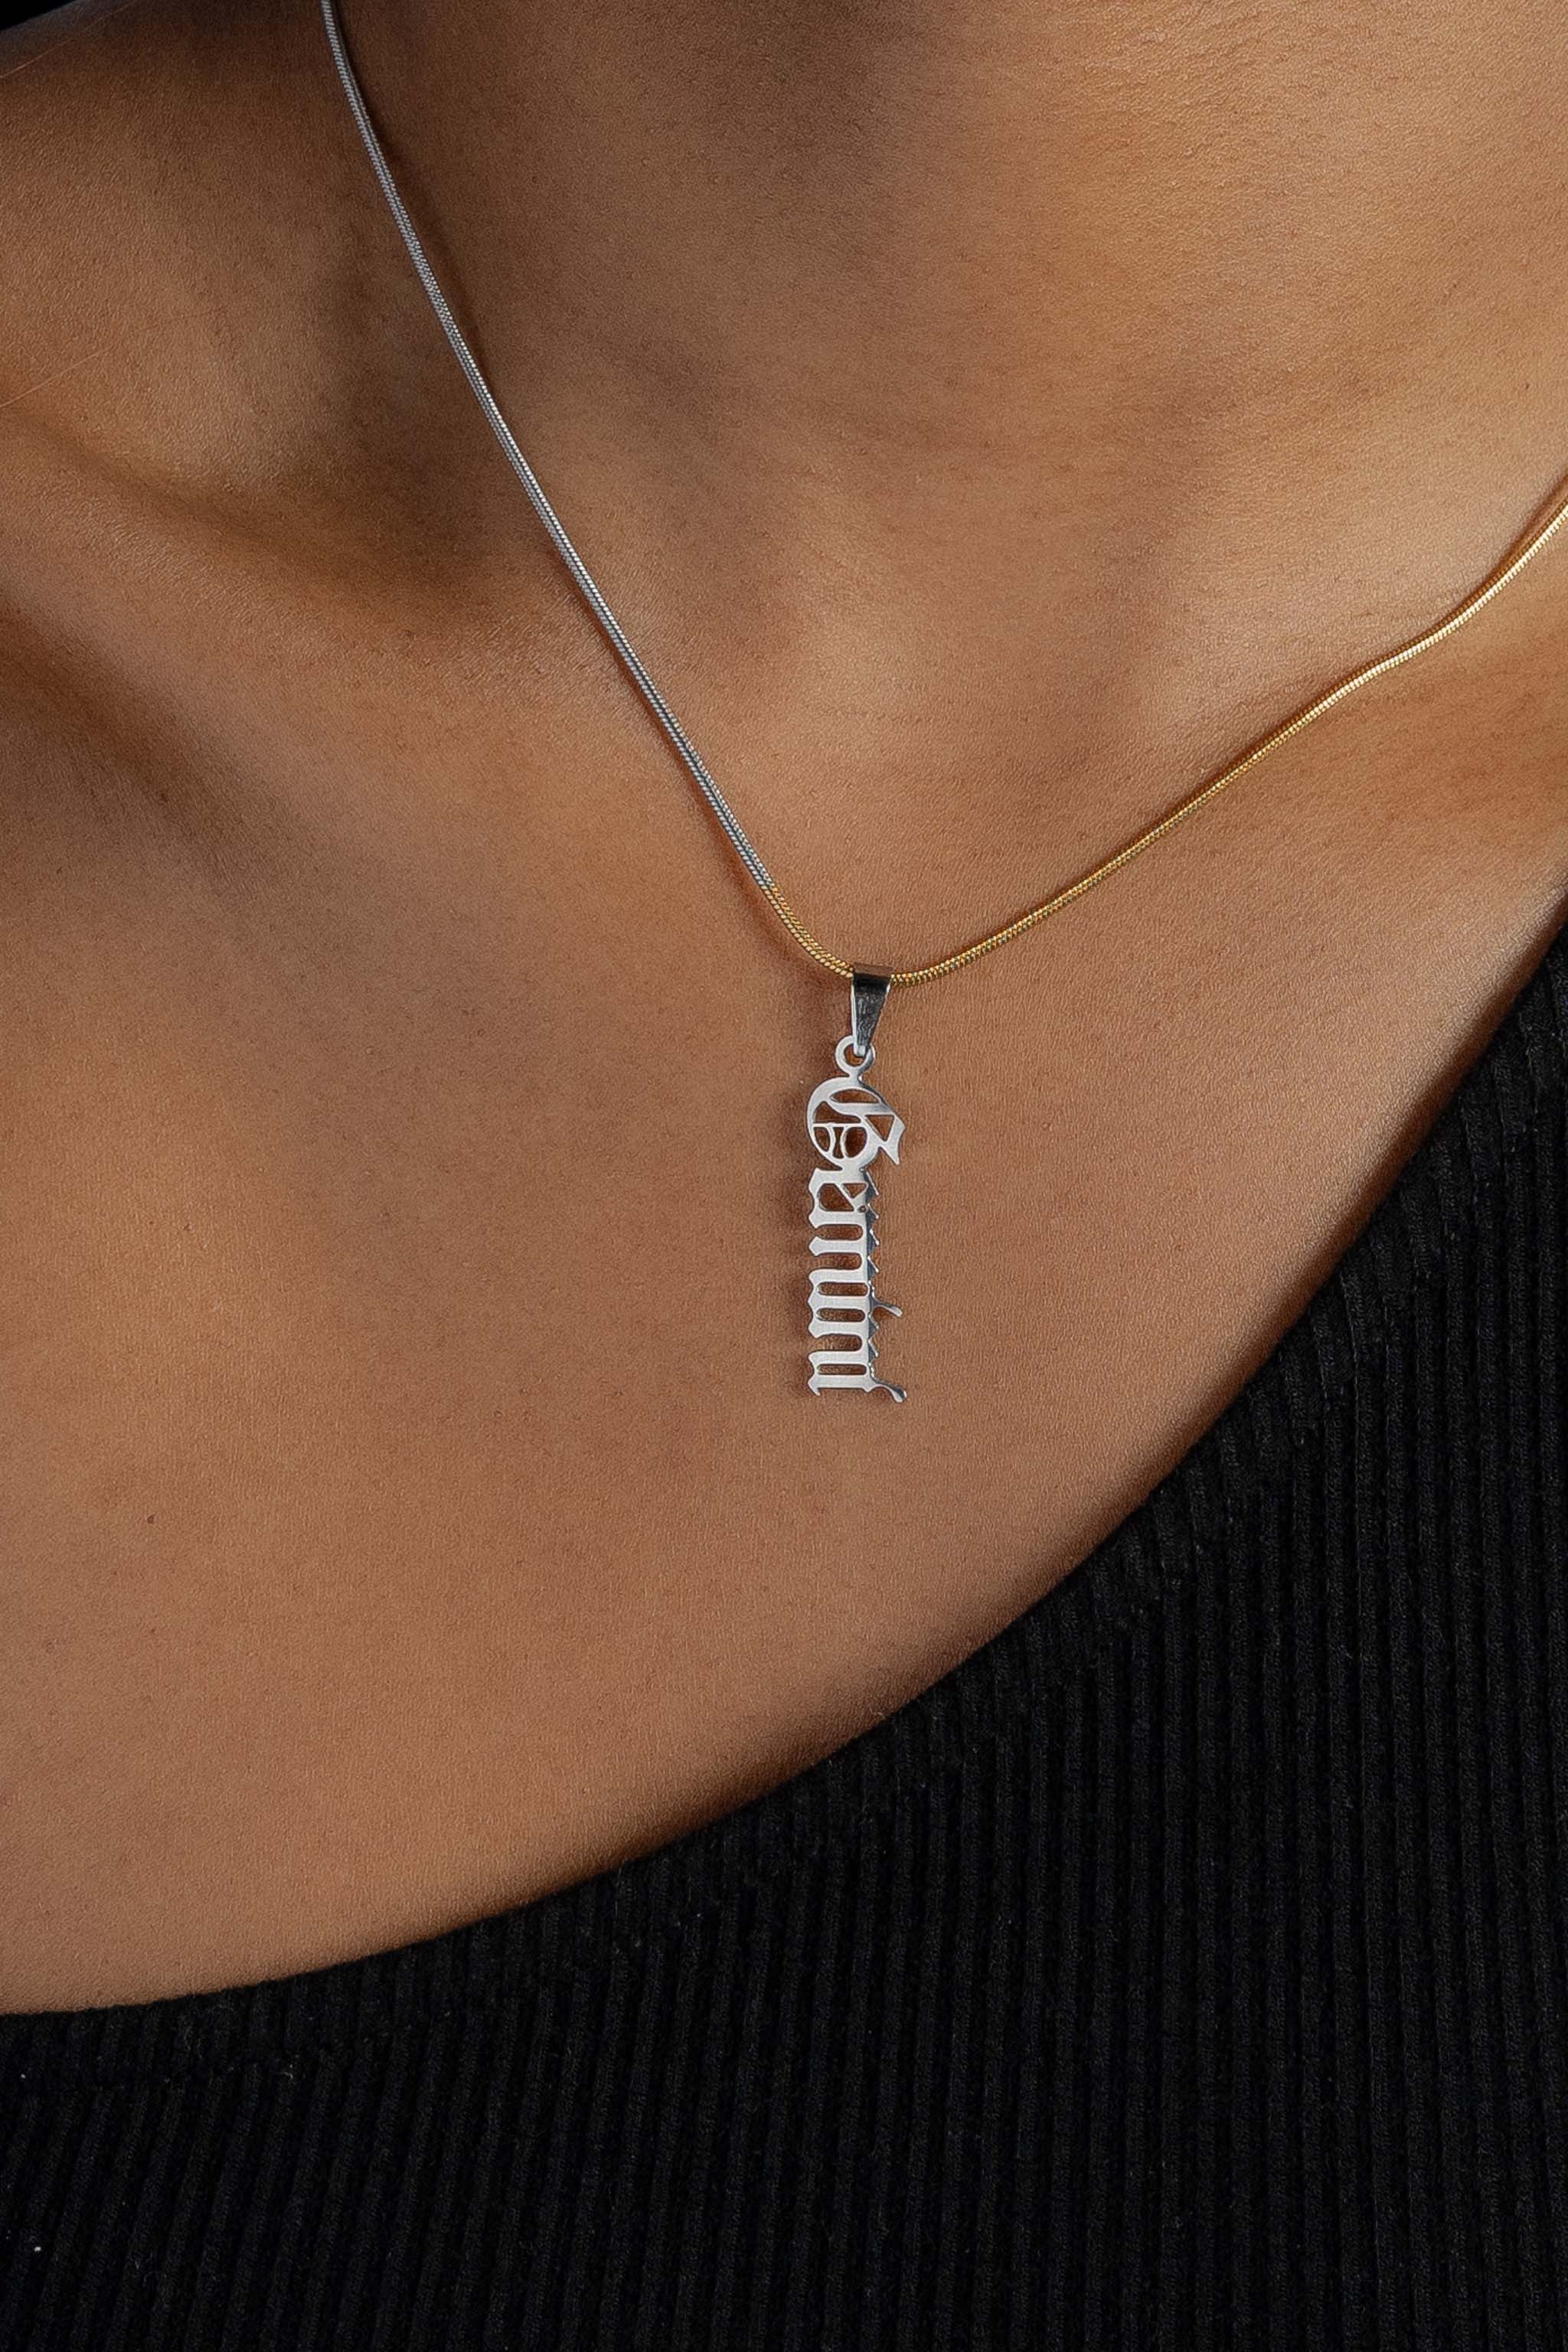 Zodiac Name Necklace with Mixed Metal Snake Chain - Silver